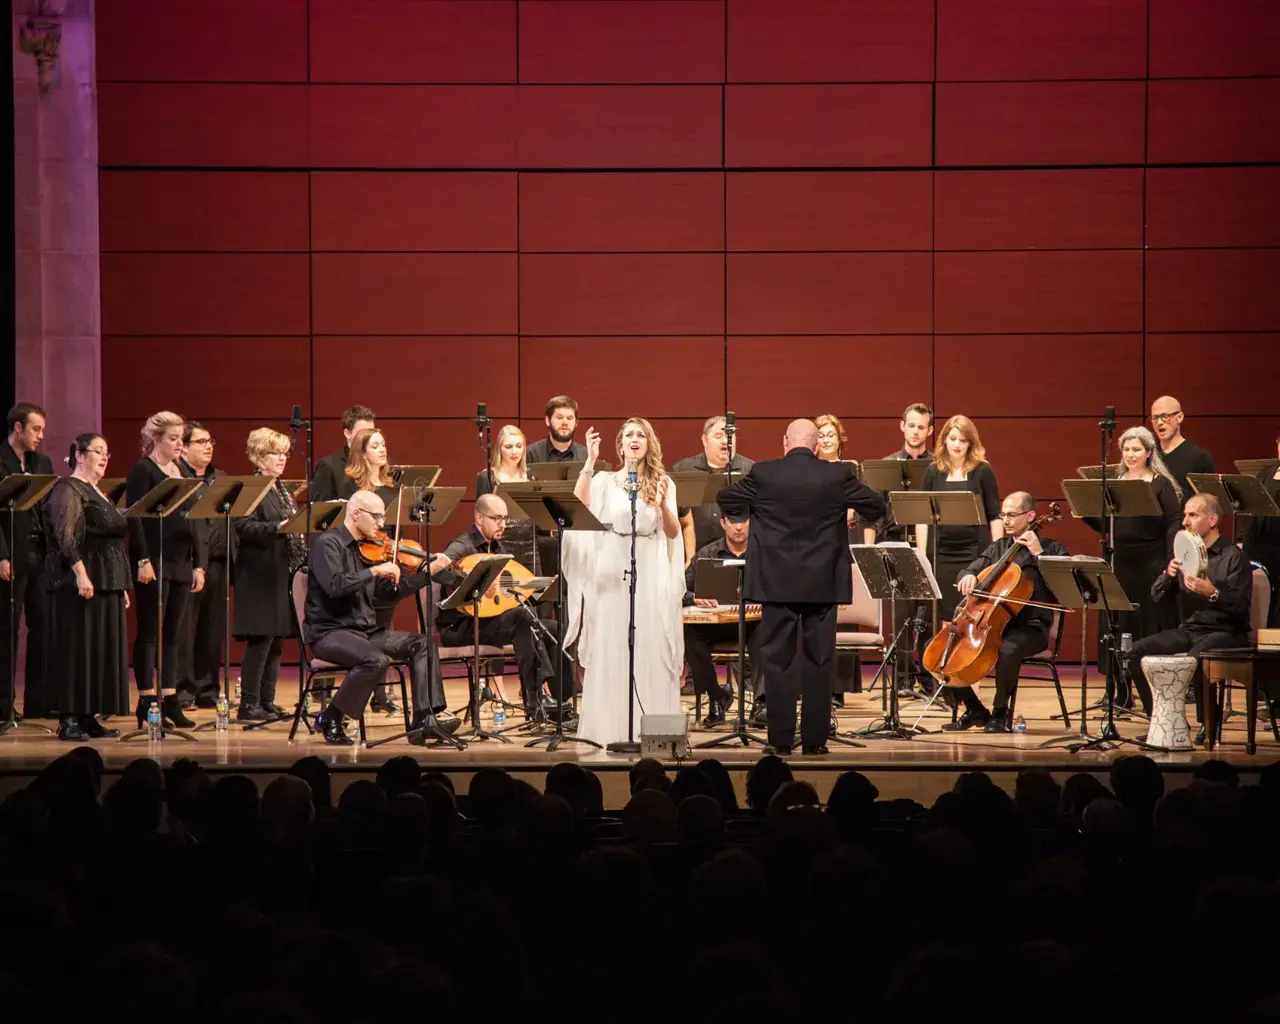 Al-Bustan Takht Ensemble in concert with The Crossing choir and soloist Dalal Abu Amneh, 2015. Photo by Chip Colson.